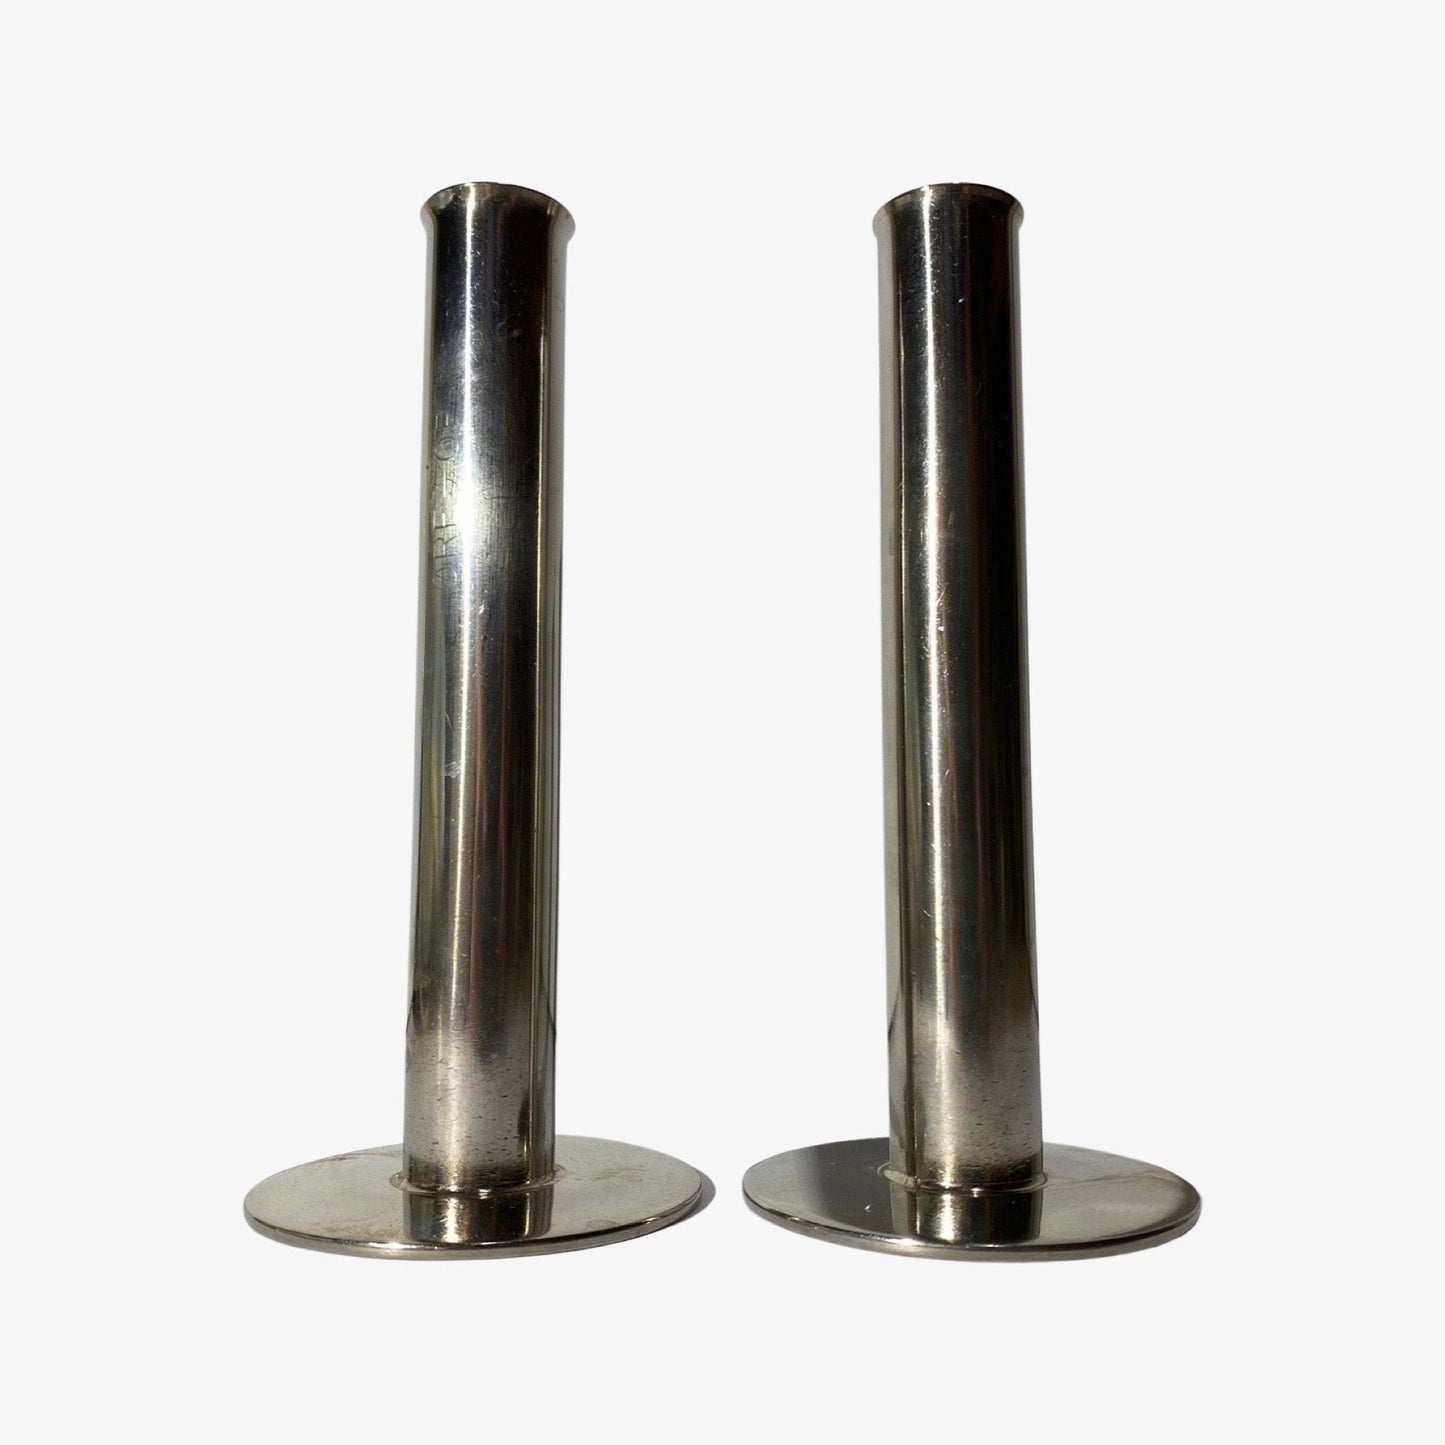 2 Swedish Vintage Candlestick Holders Made in Sweden | METEKTRO ROSTFRITT ØRE-op | Stainless Steel Candle Holders | Height: 7.5'' / 19 cm